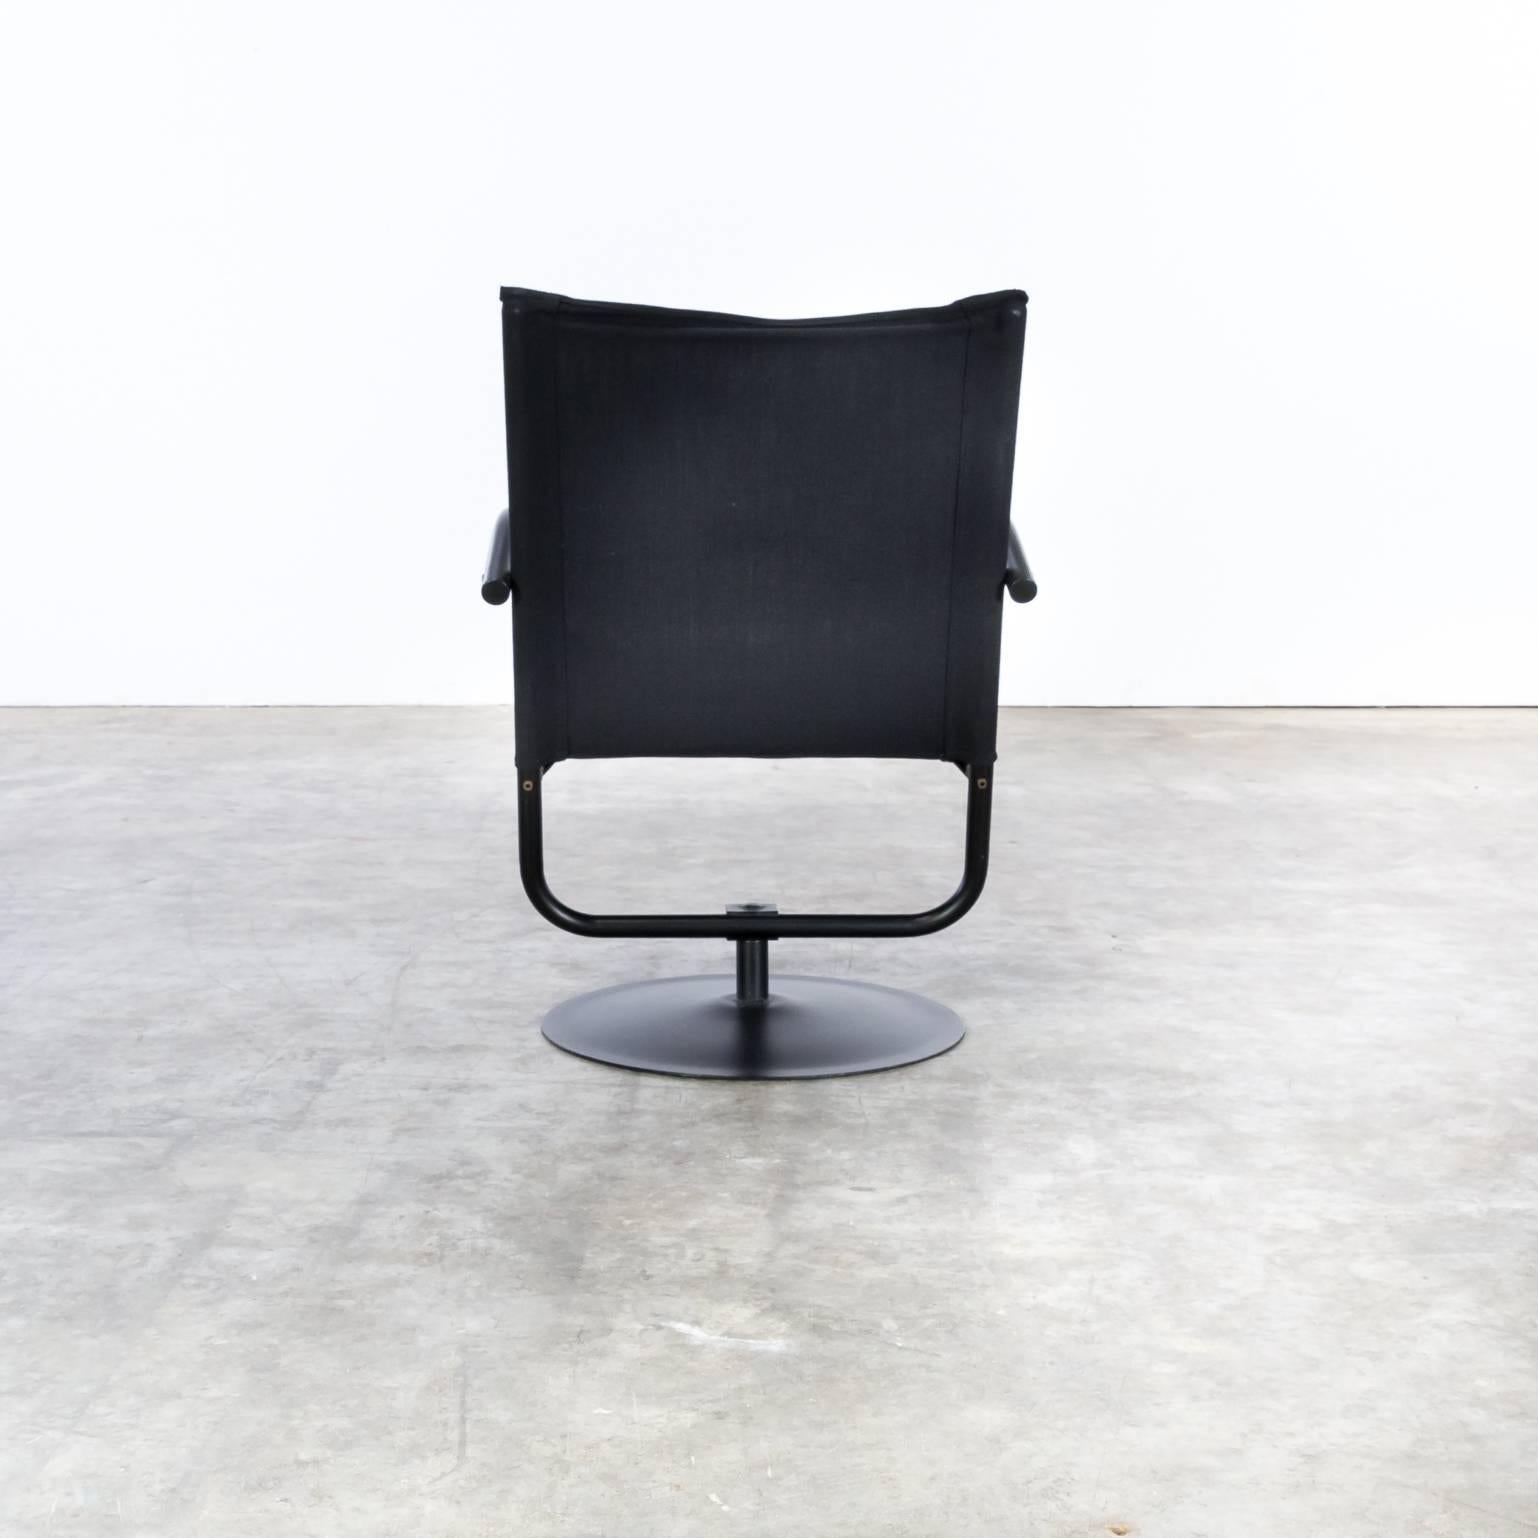 Metal Design Swivel Chair Black Canvas Fabric Attributed to Mazairac & Boonzaaier For Sale